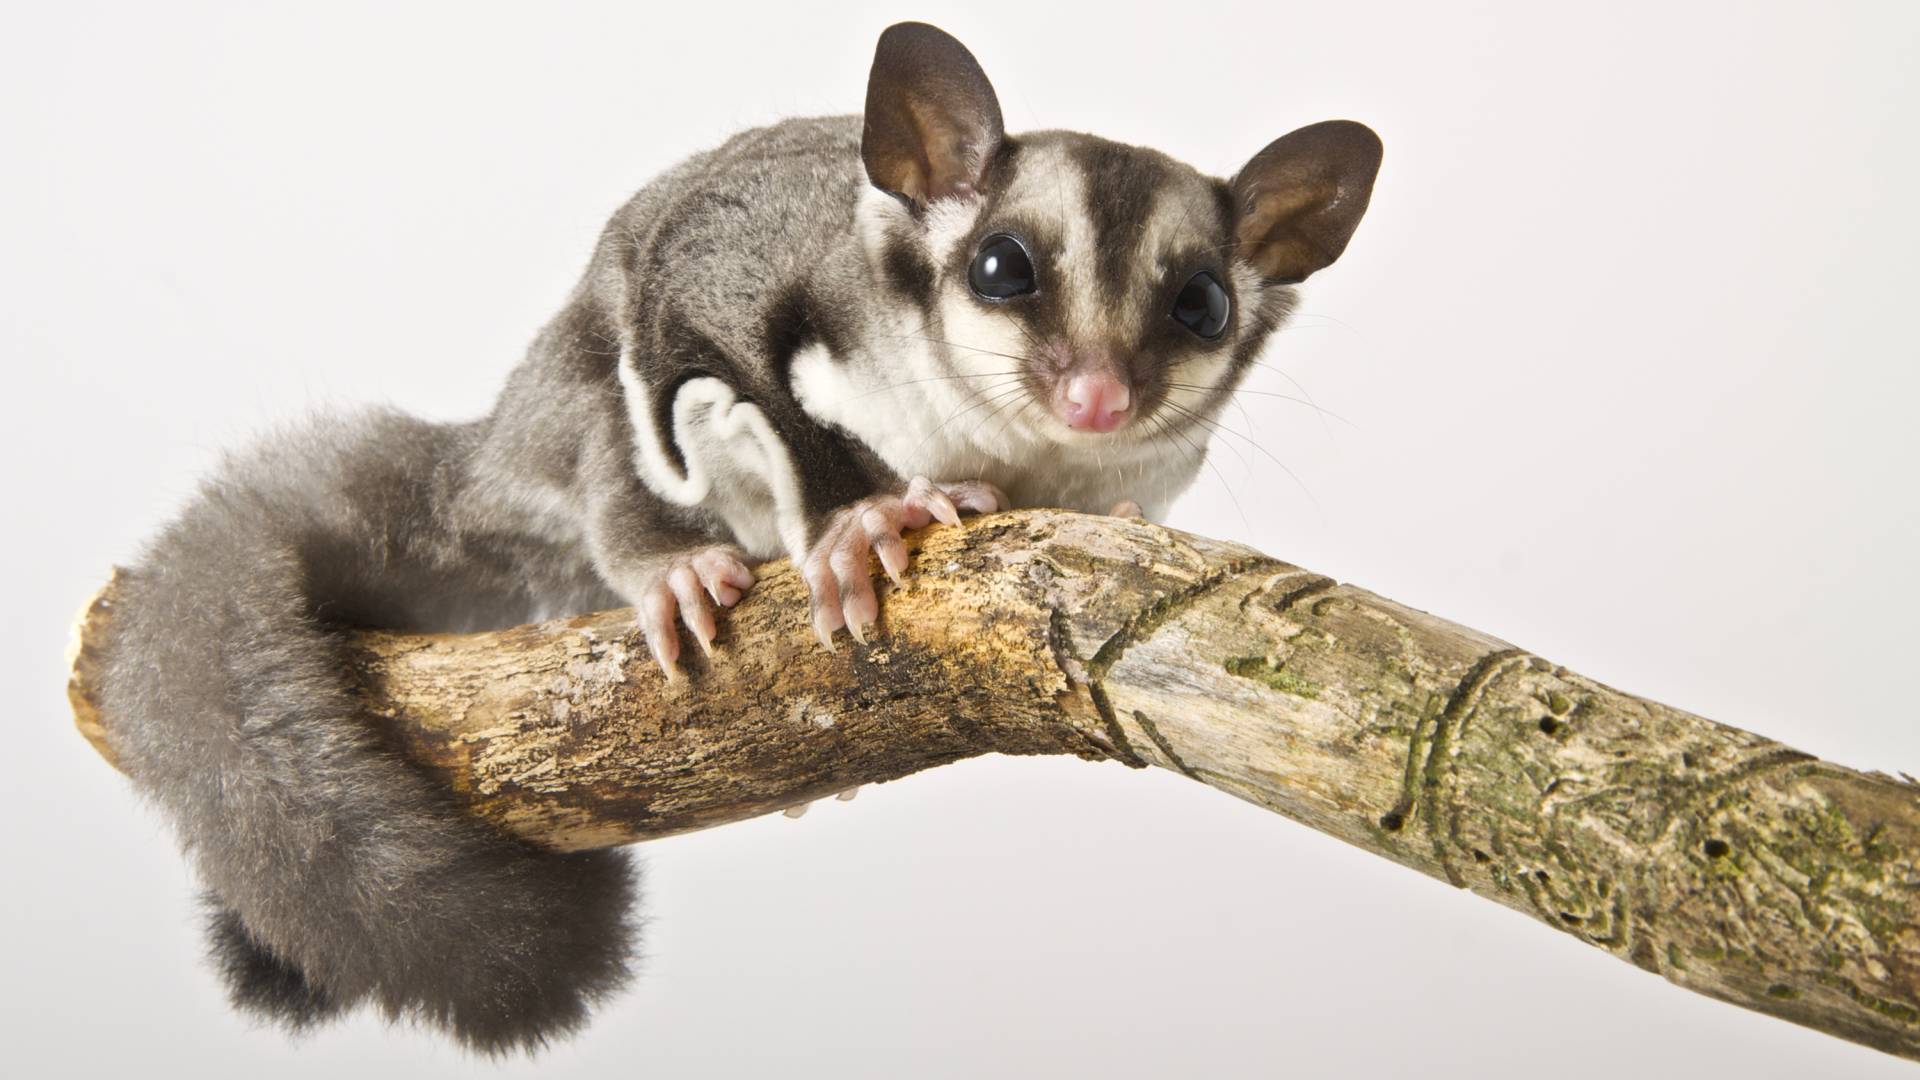 A Tiny Marsupial is Upending Ideas About the Origins of Flying Mammals